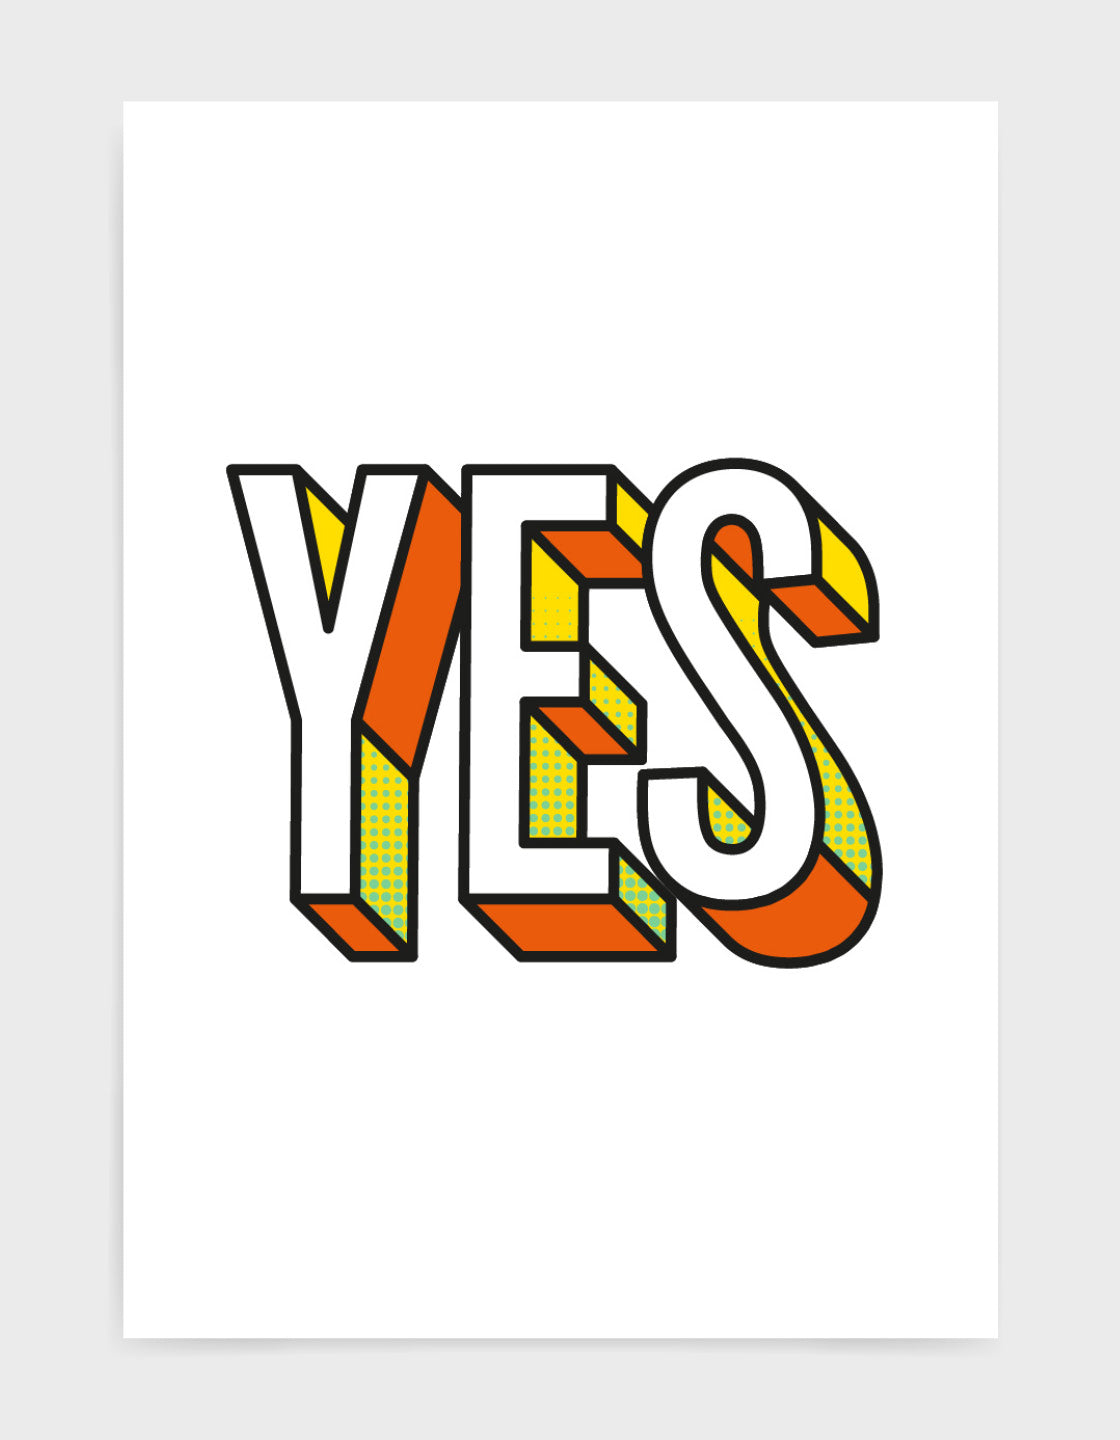 Yes bold typography print in 3D custom font with yellow and orange accents against a white background